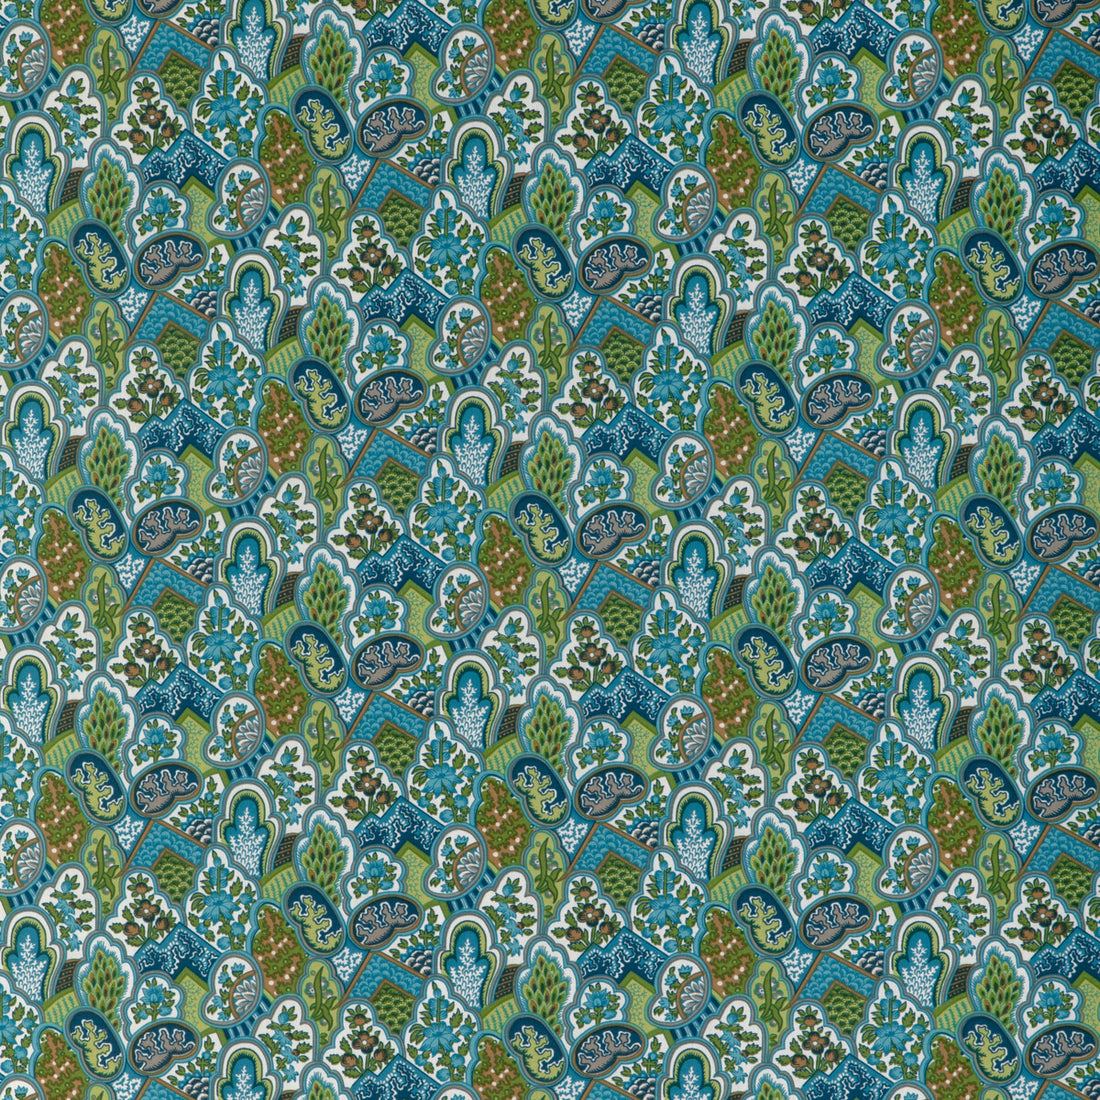 Villandry Print fabric in aqua color - pattern 8024108.353.0 - by Brunschwig &amp; Fils in the La Menagerie collection